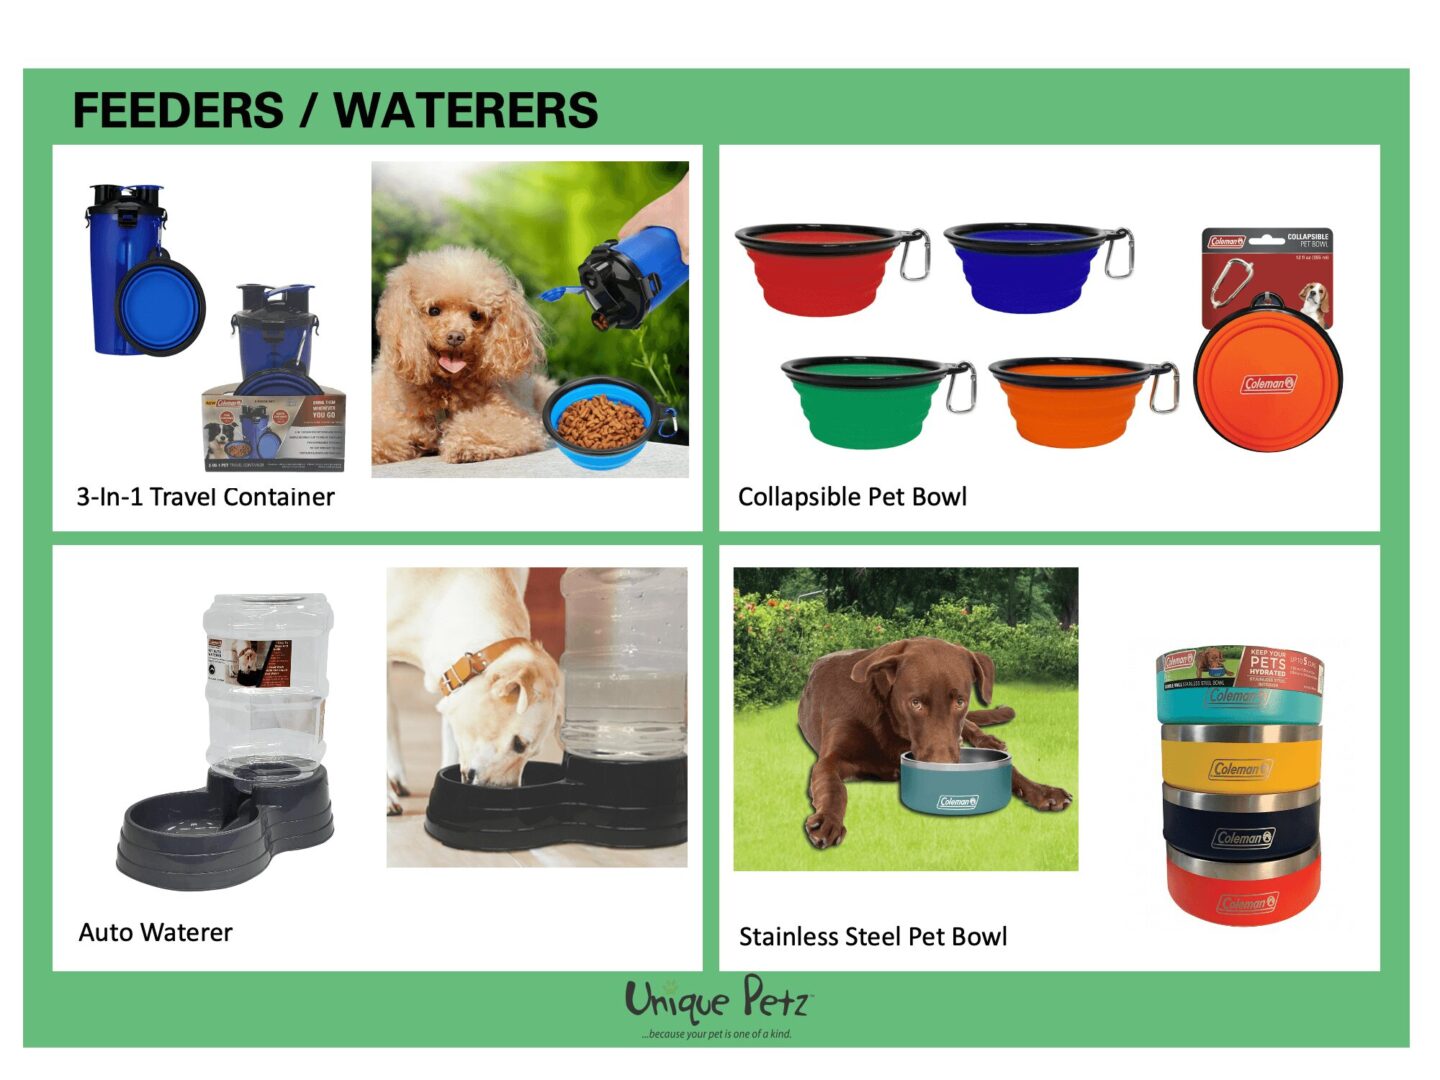 Unique Petz - Feeders and waterers